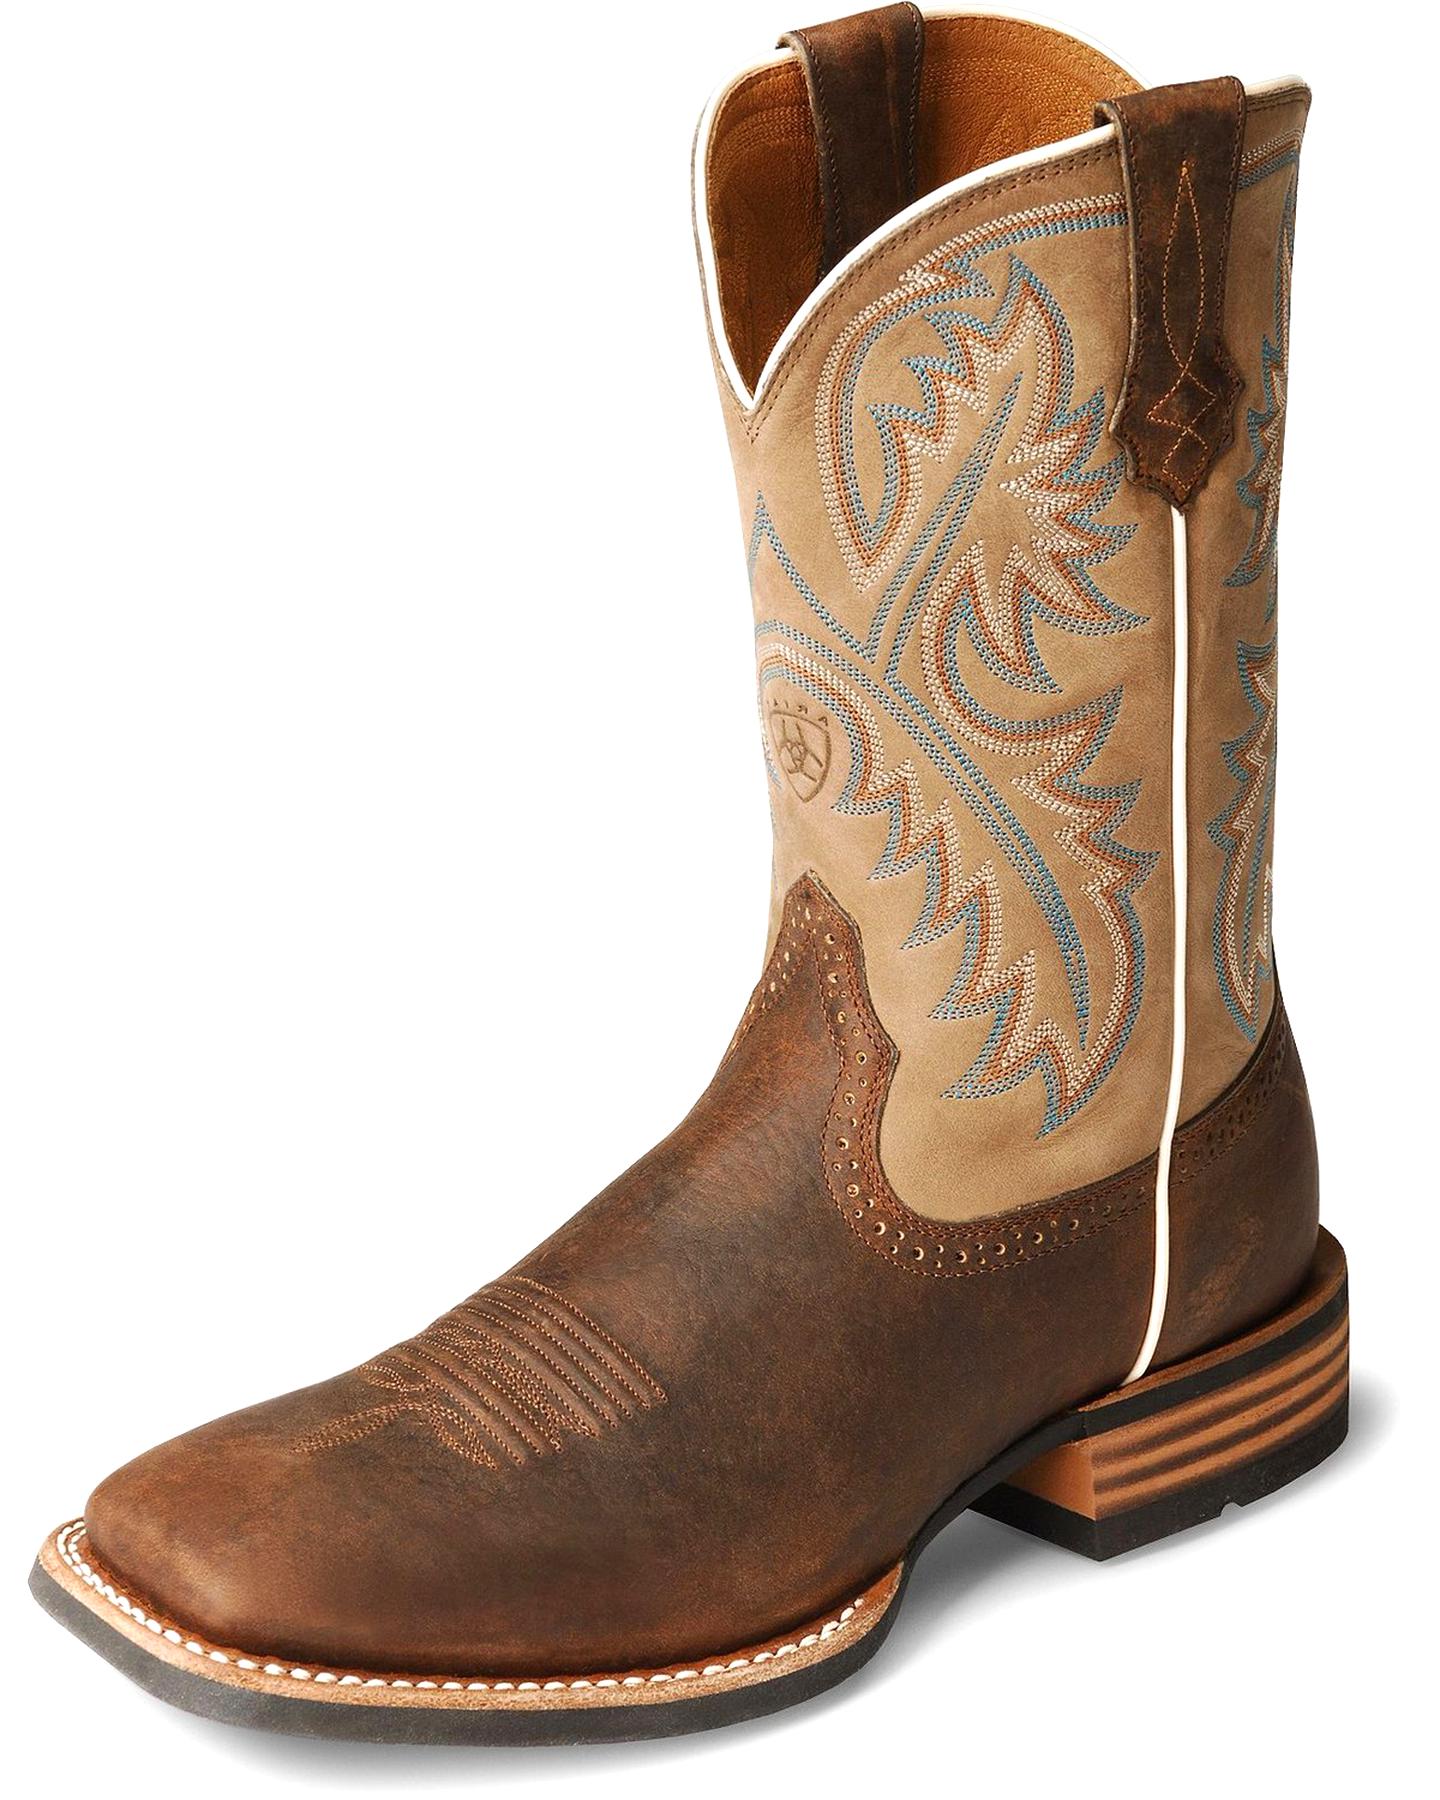 Ariat Boots for sale in UK | 86 used Ariat Boots